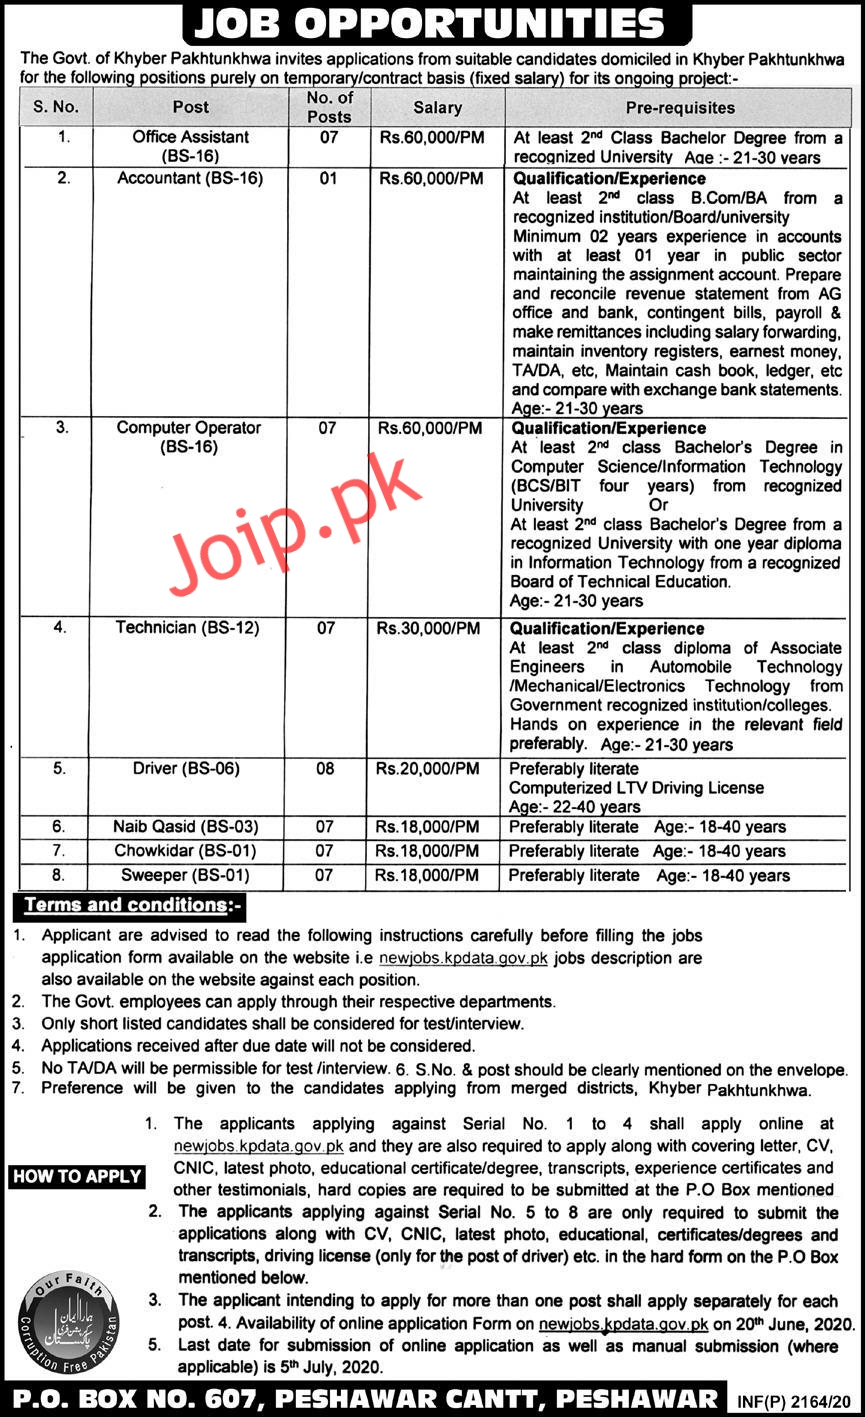 Government Of Khyber Pakhtunkhwa Jobs